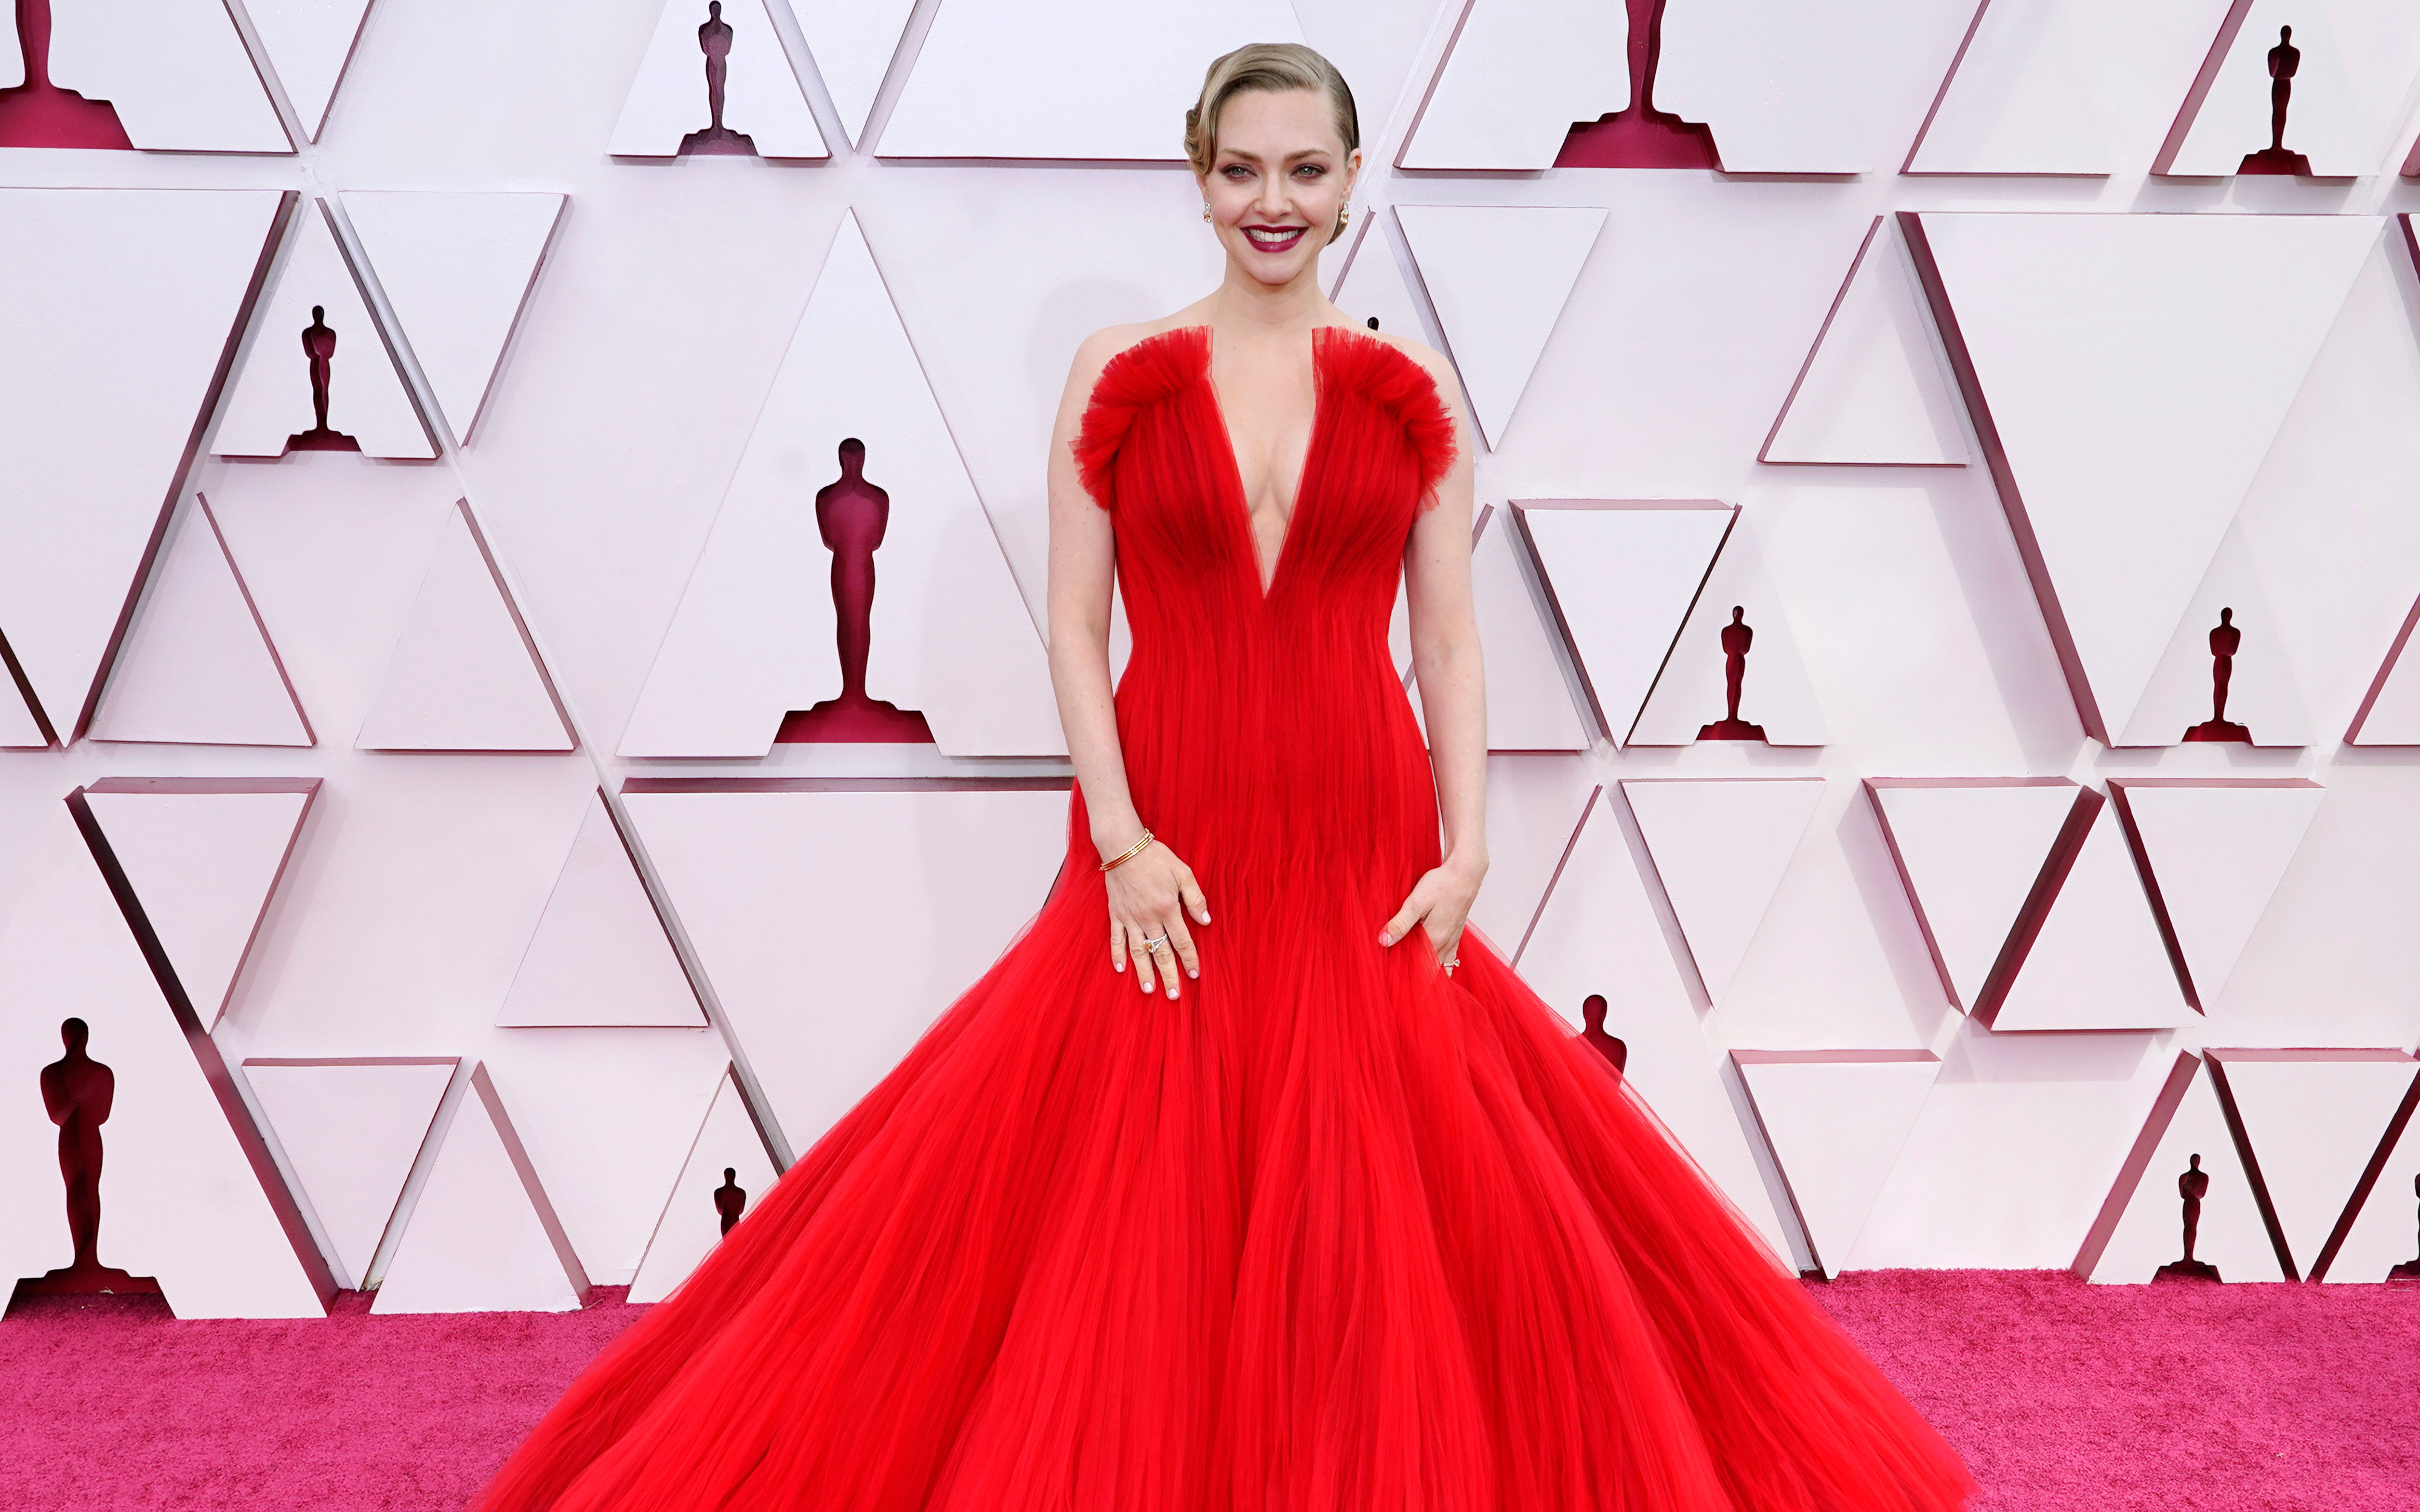 11 V-Neck Gowns for Virtual Prom, Inspired by the 2021 Oscars